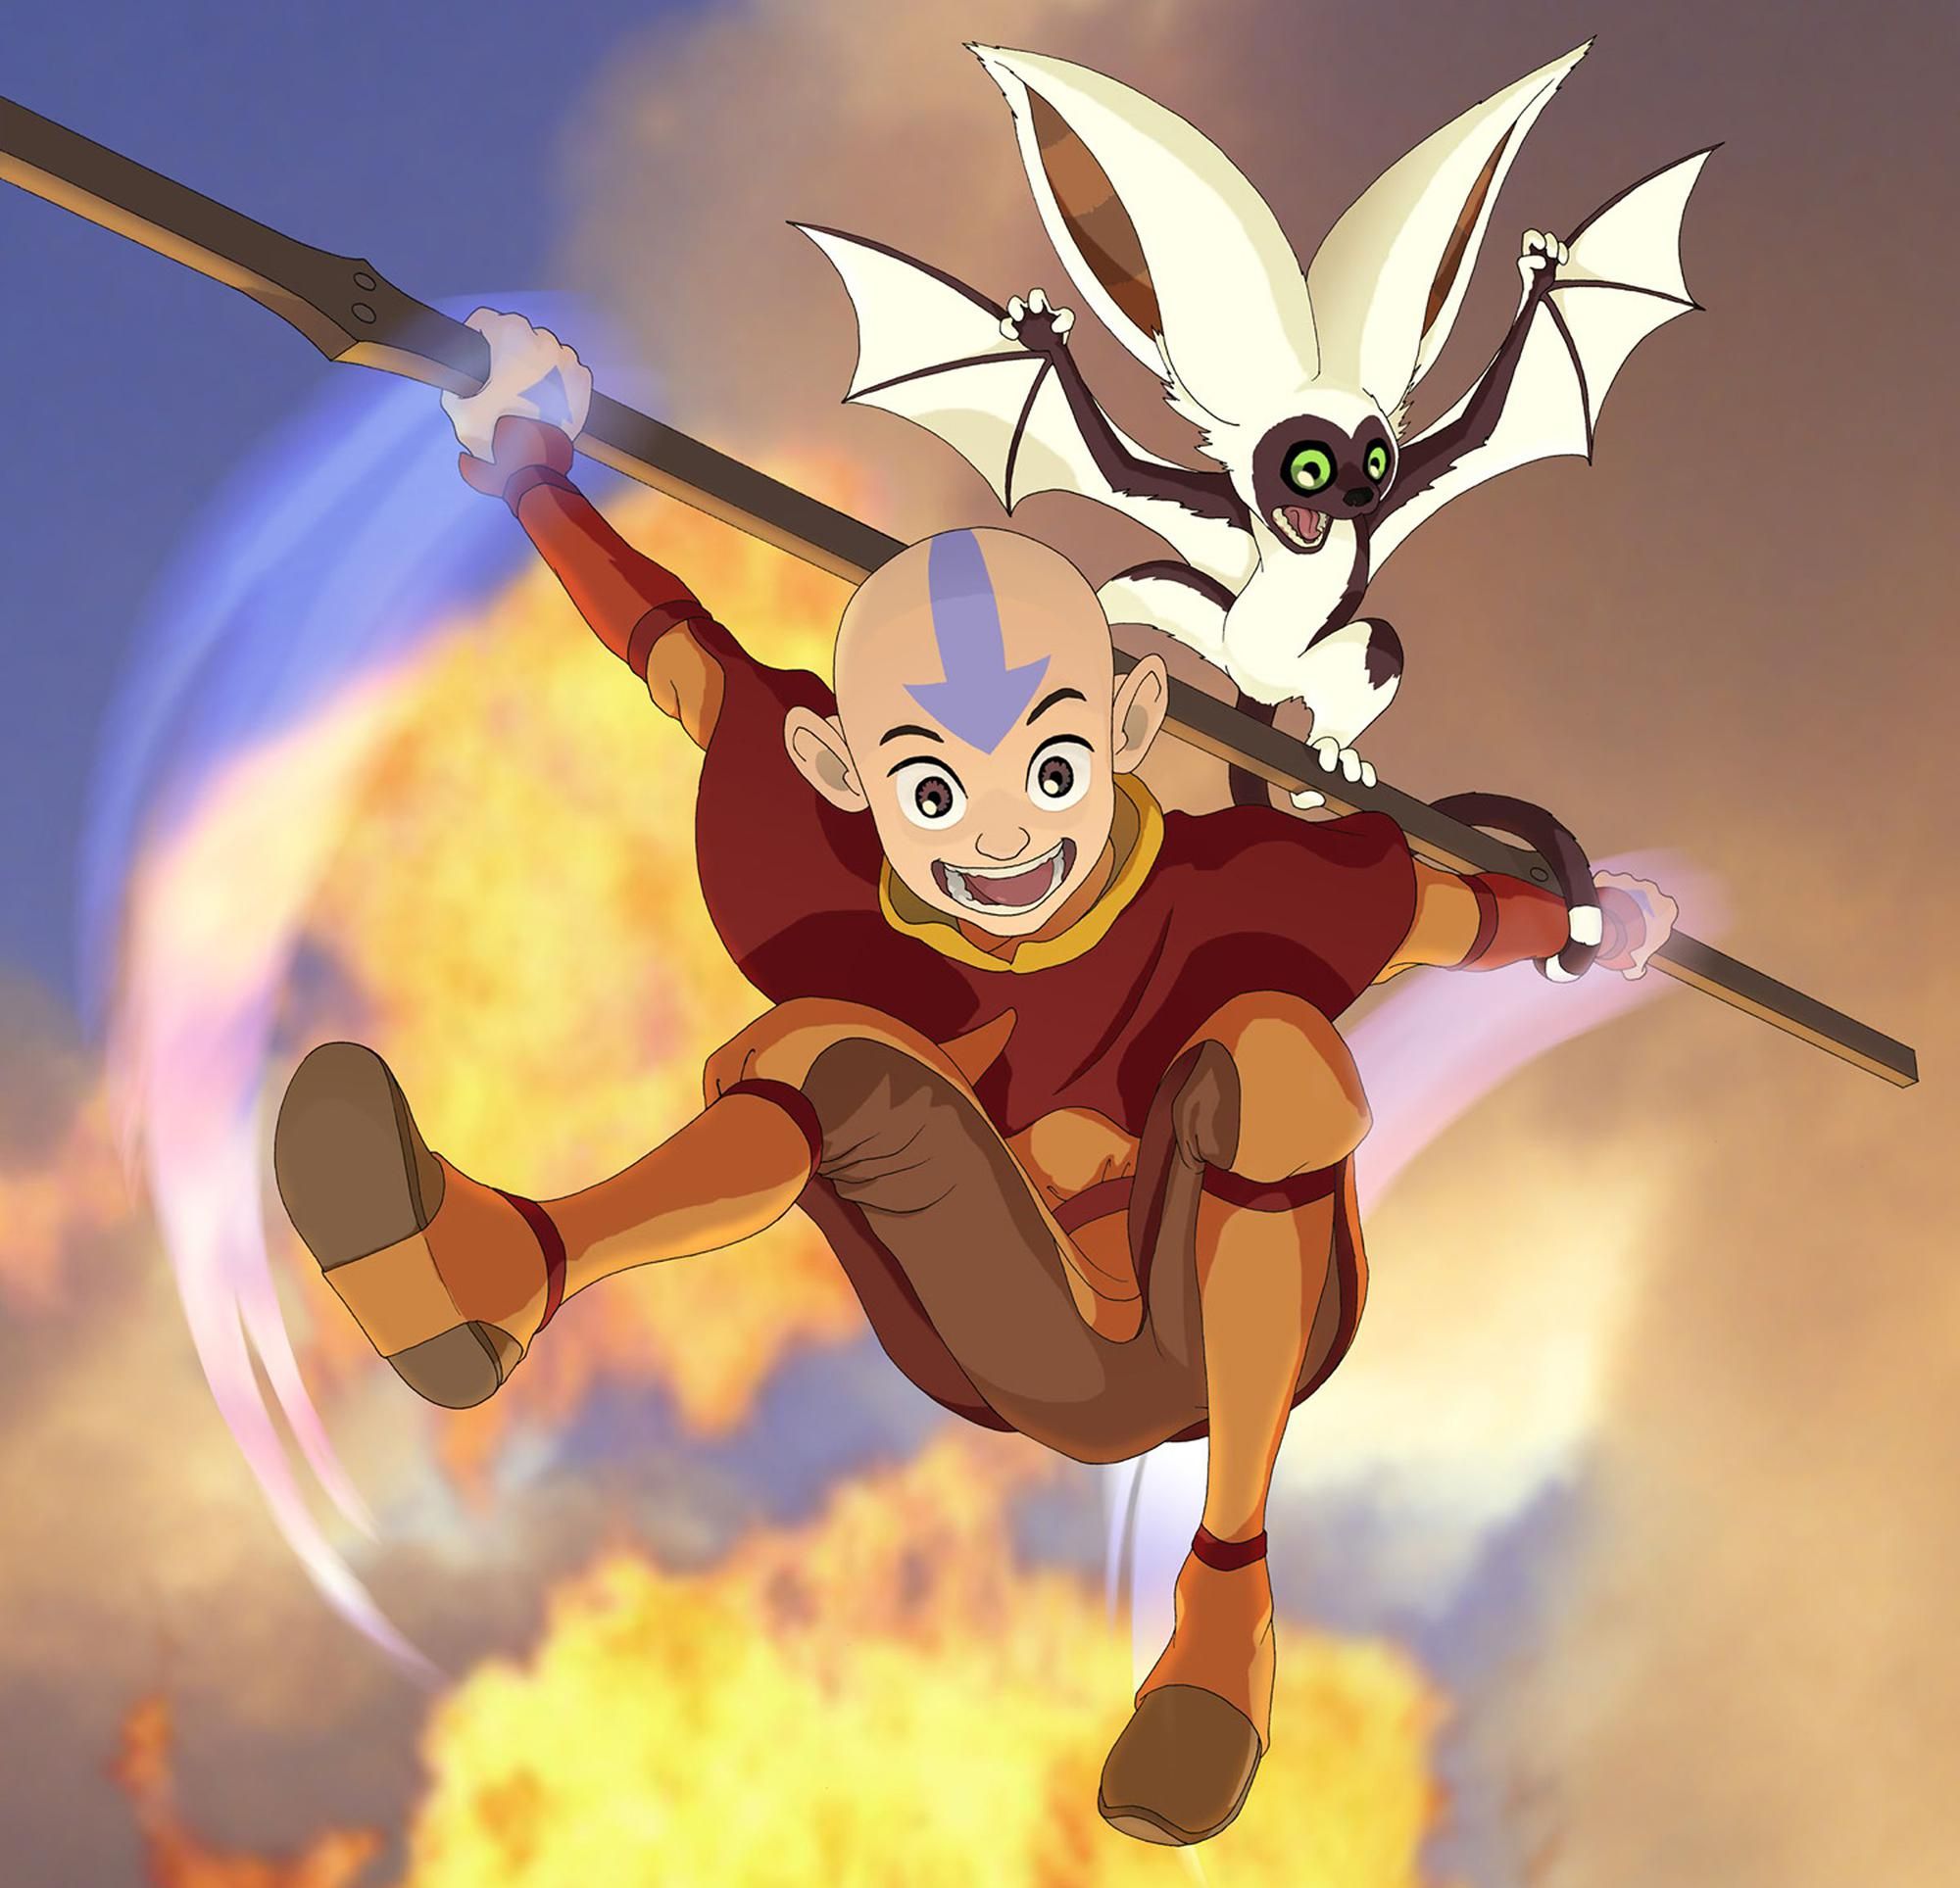 Aang and Momo from Nickelodeon 's Avatar the Last Airbender leap dramatically against a fiery background.